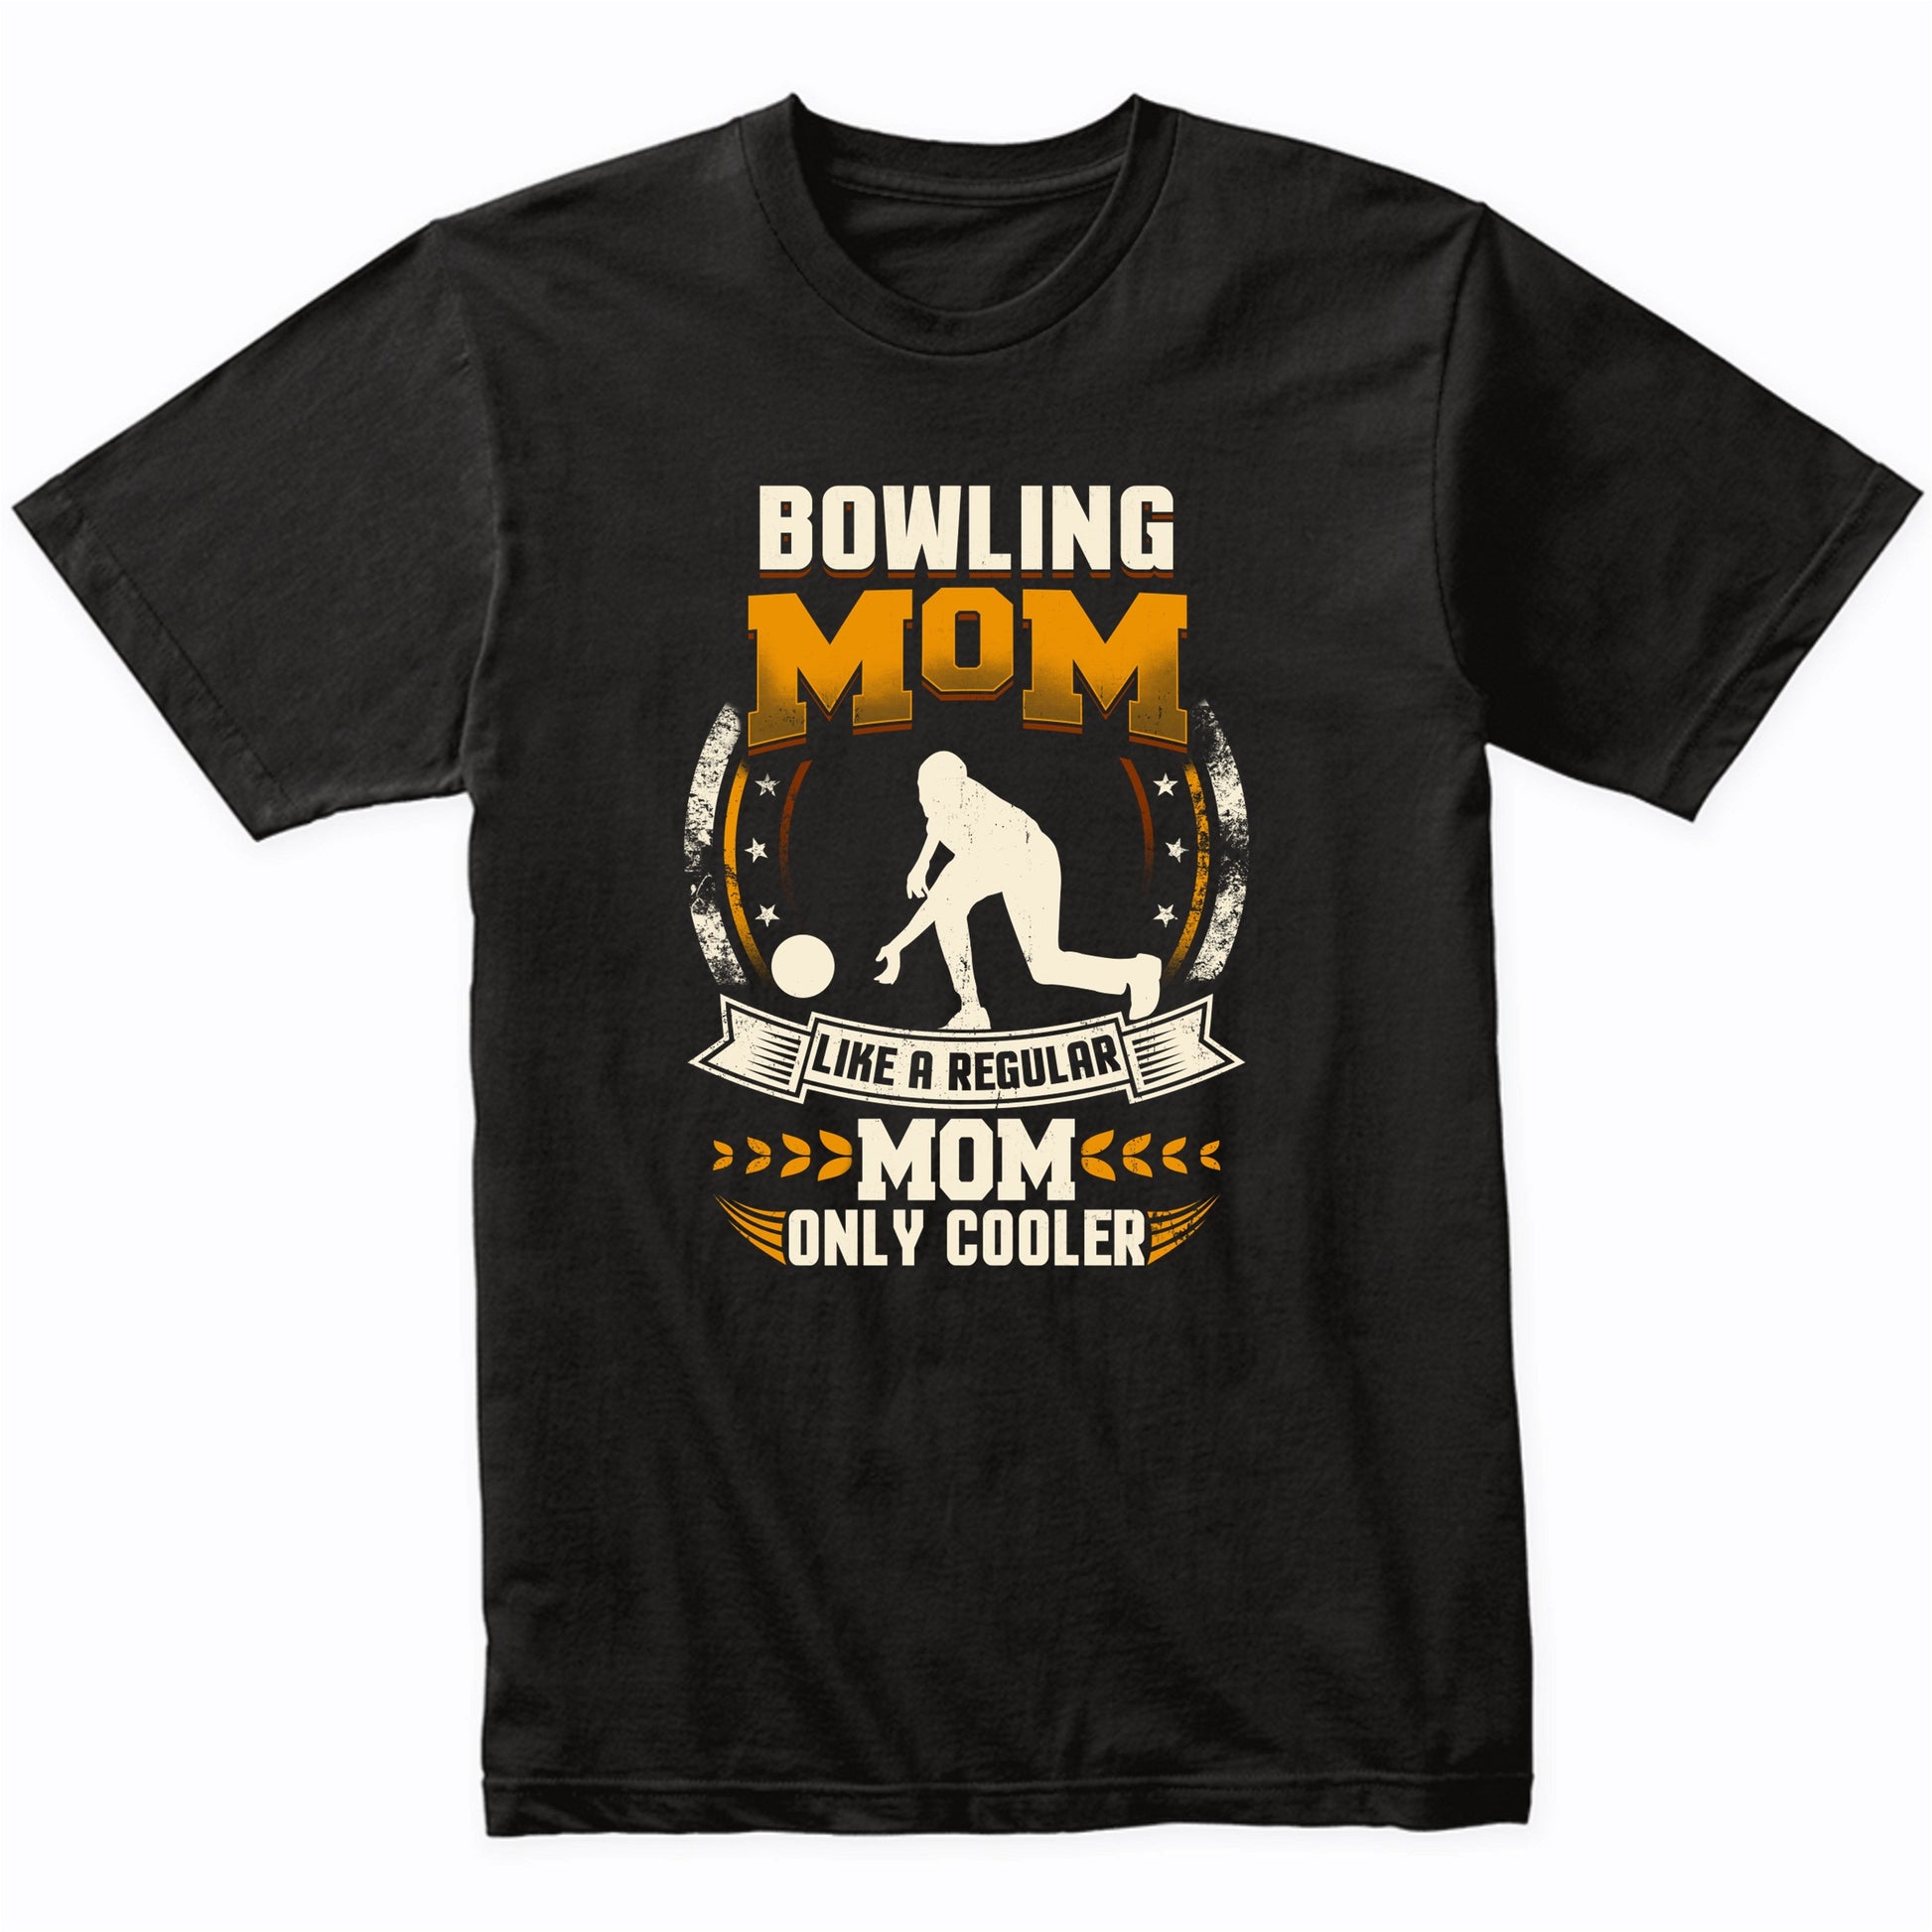 Bowling Mom Like A Regular Mom Only Cooler Funny T-Shirt